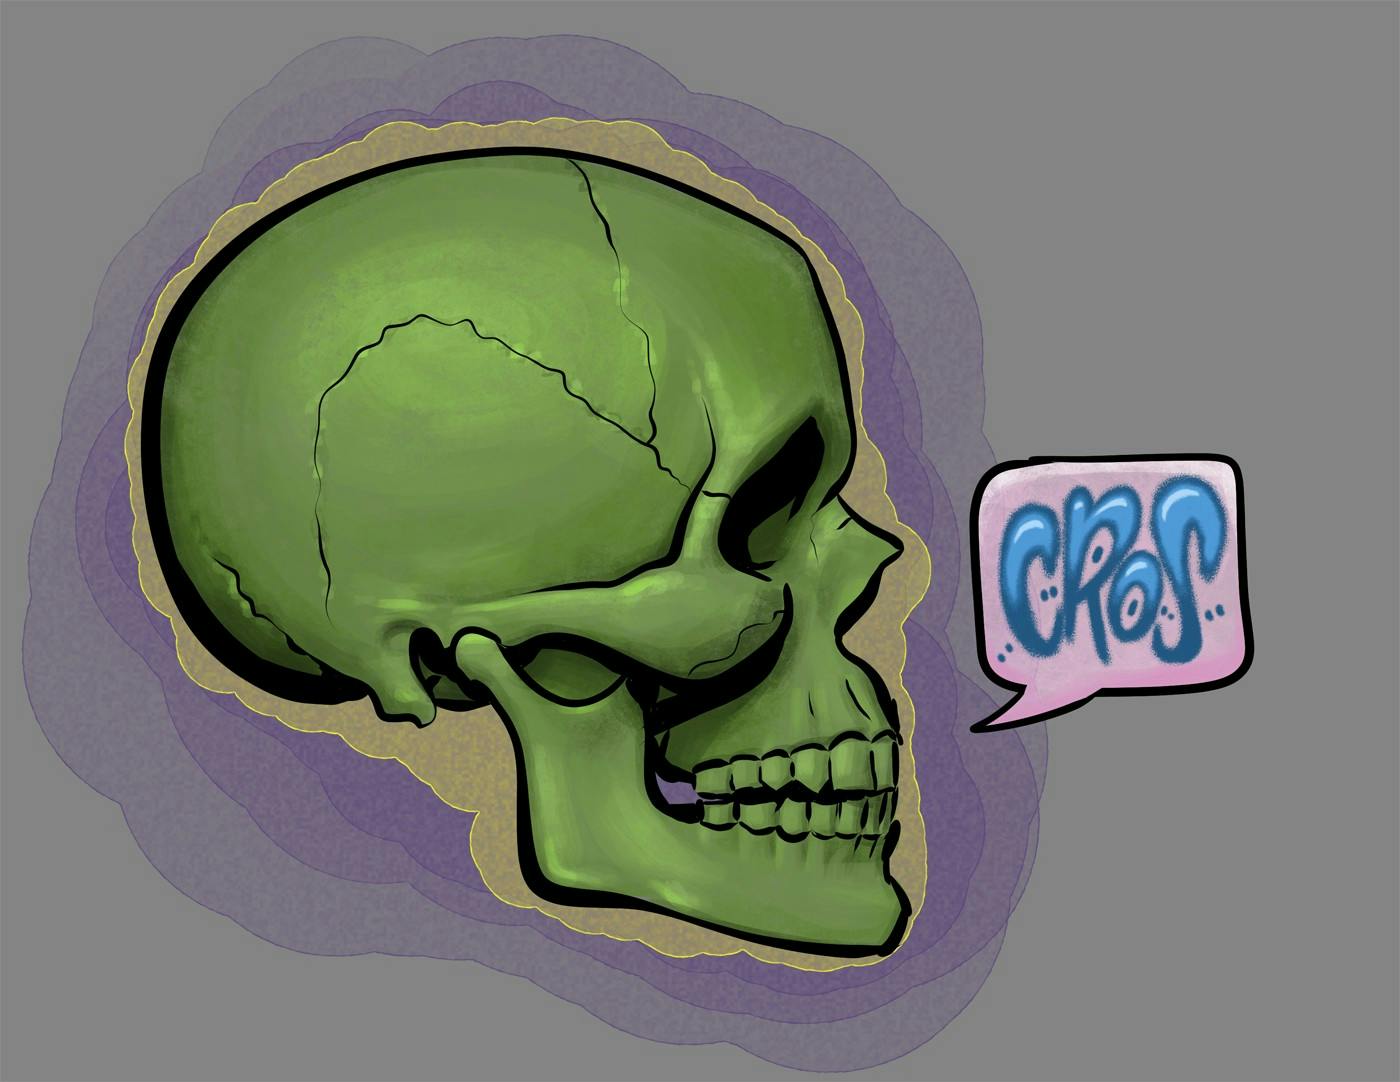 A digital illustration of a human skull in profile saying "CROS", it is drawn using black comic book line work and rendered semi-realistically in bright green.